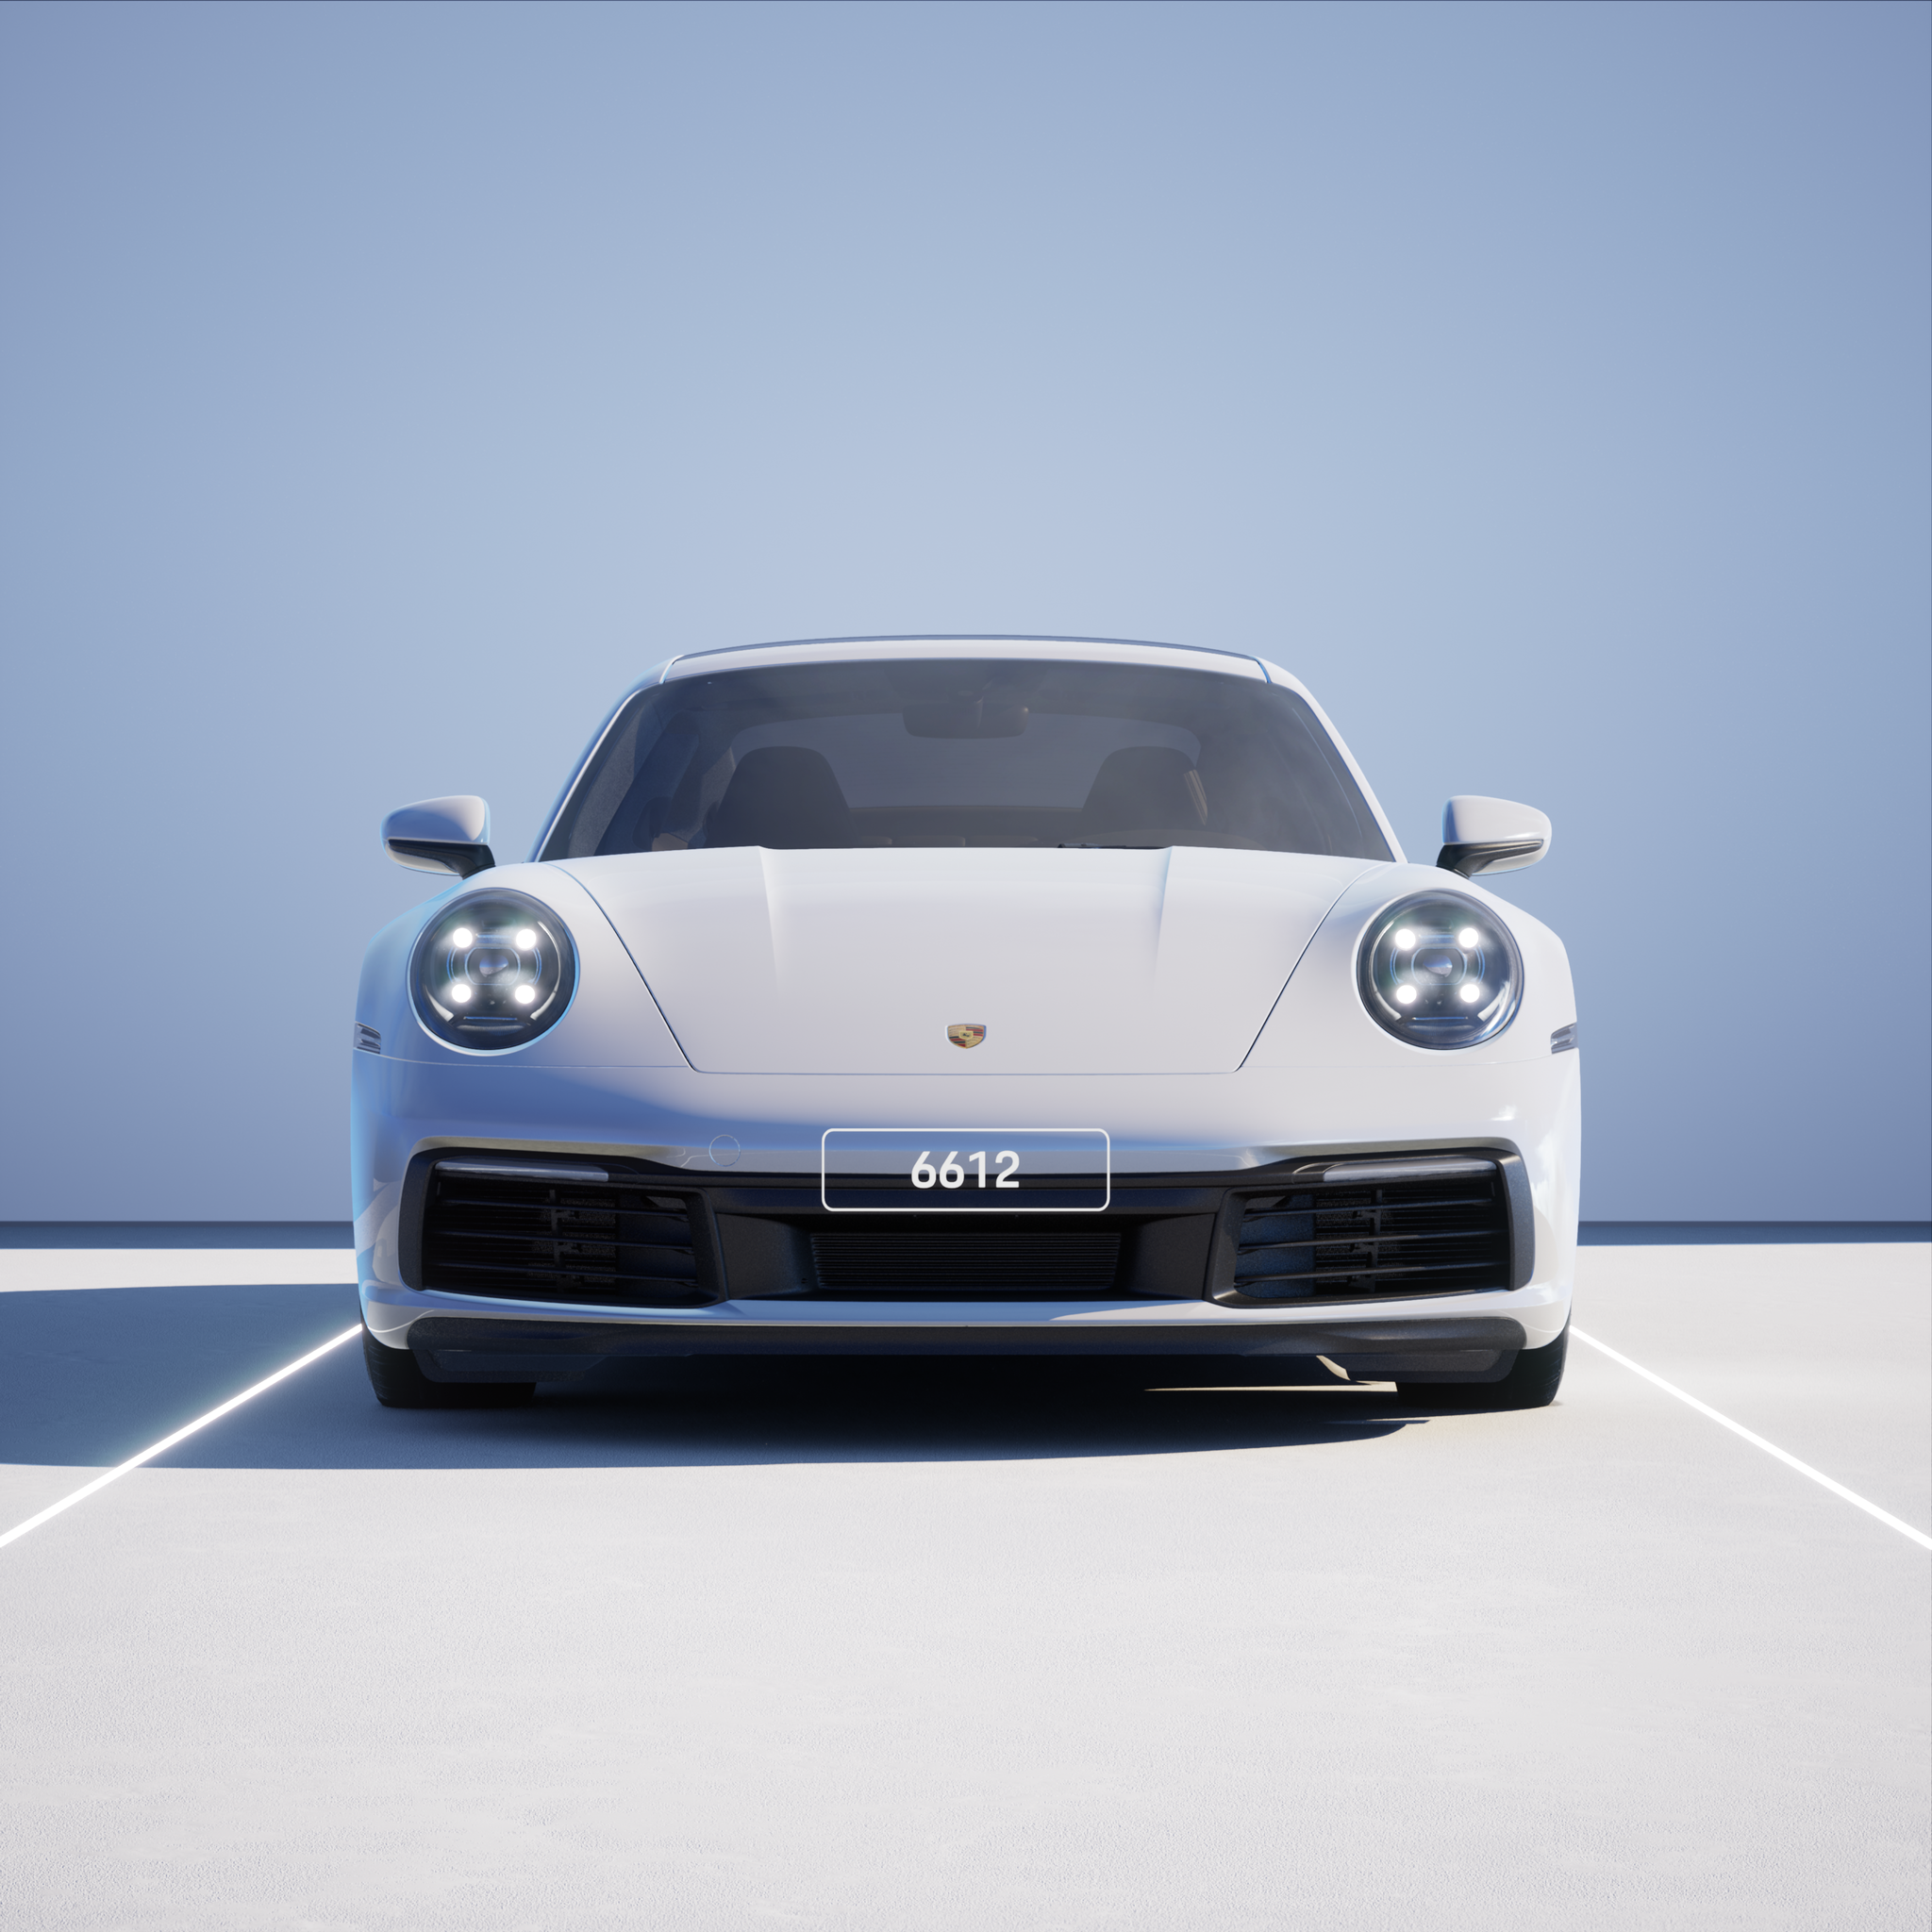 The PORSCHΞ 911 6612 image in phase